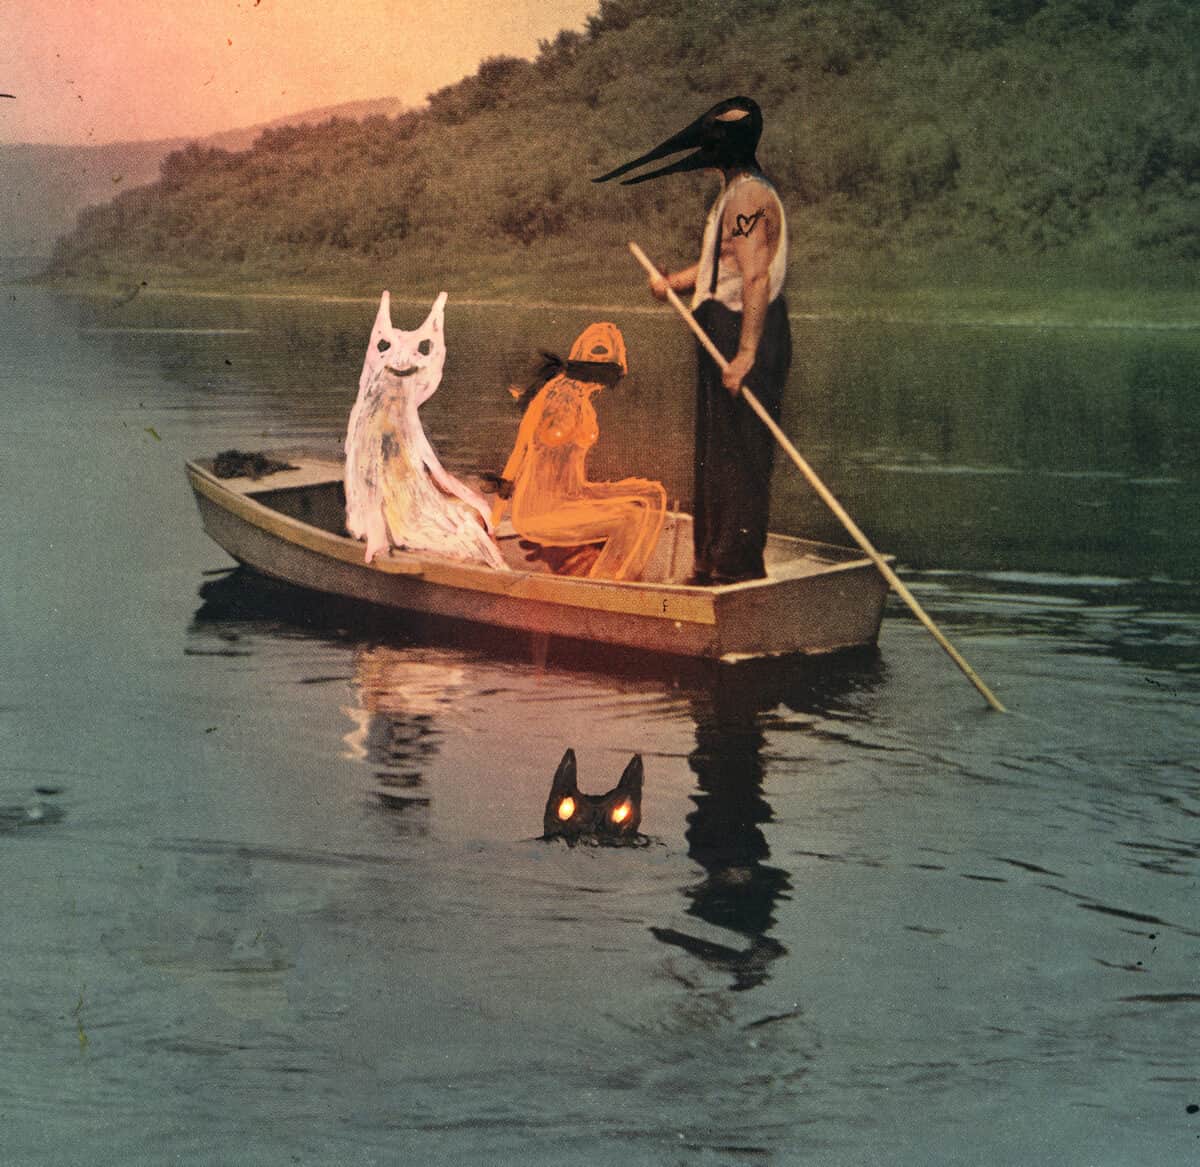 Julia Soboela, Three on a Boat, Not Counting the Dog, Acrylic and photograph, Dimensions vary